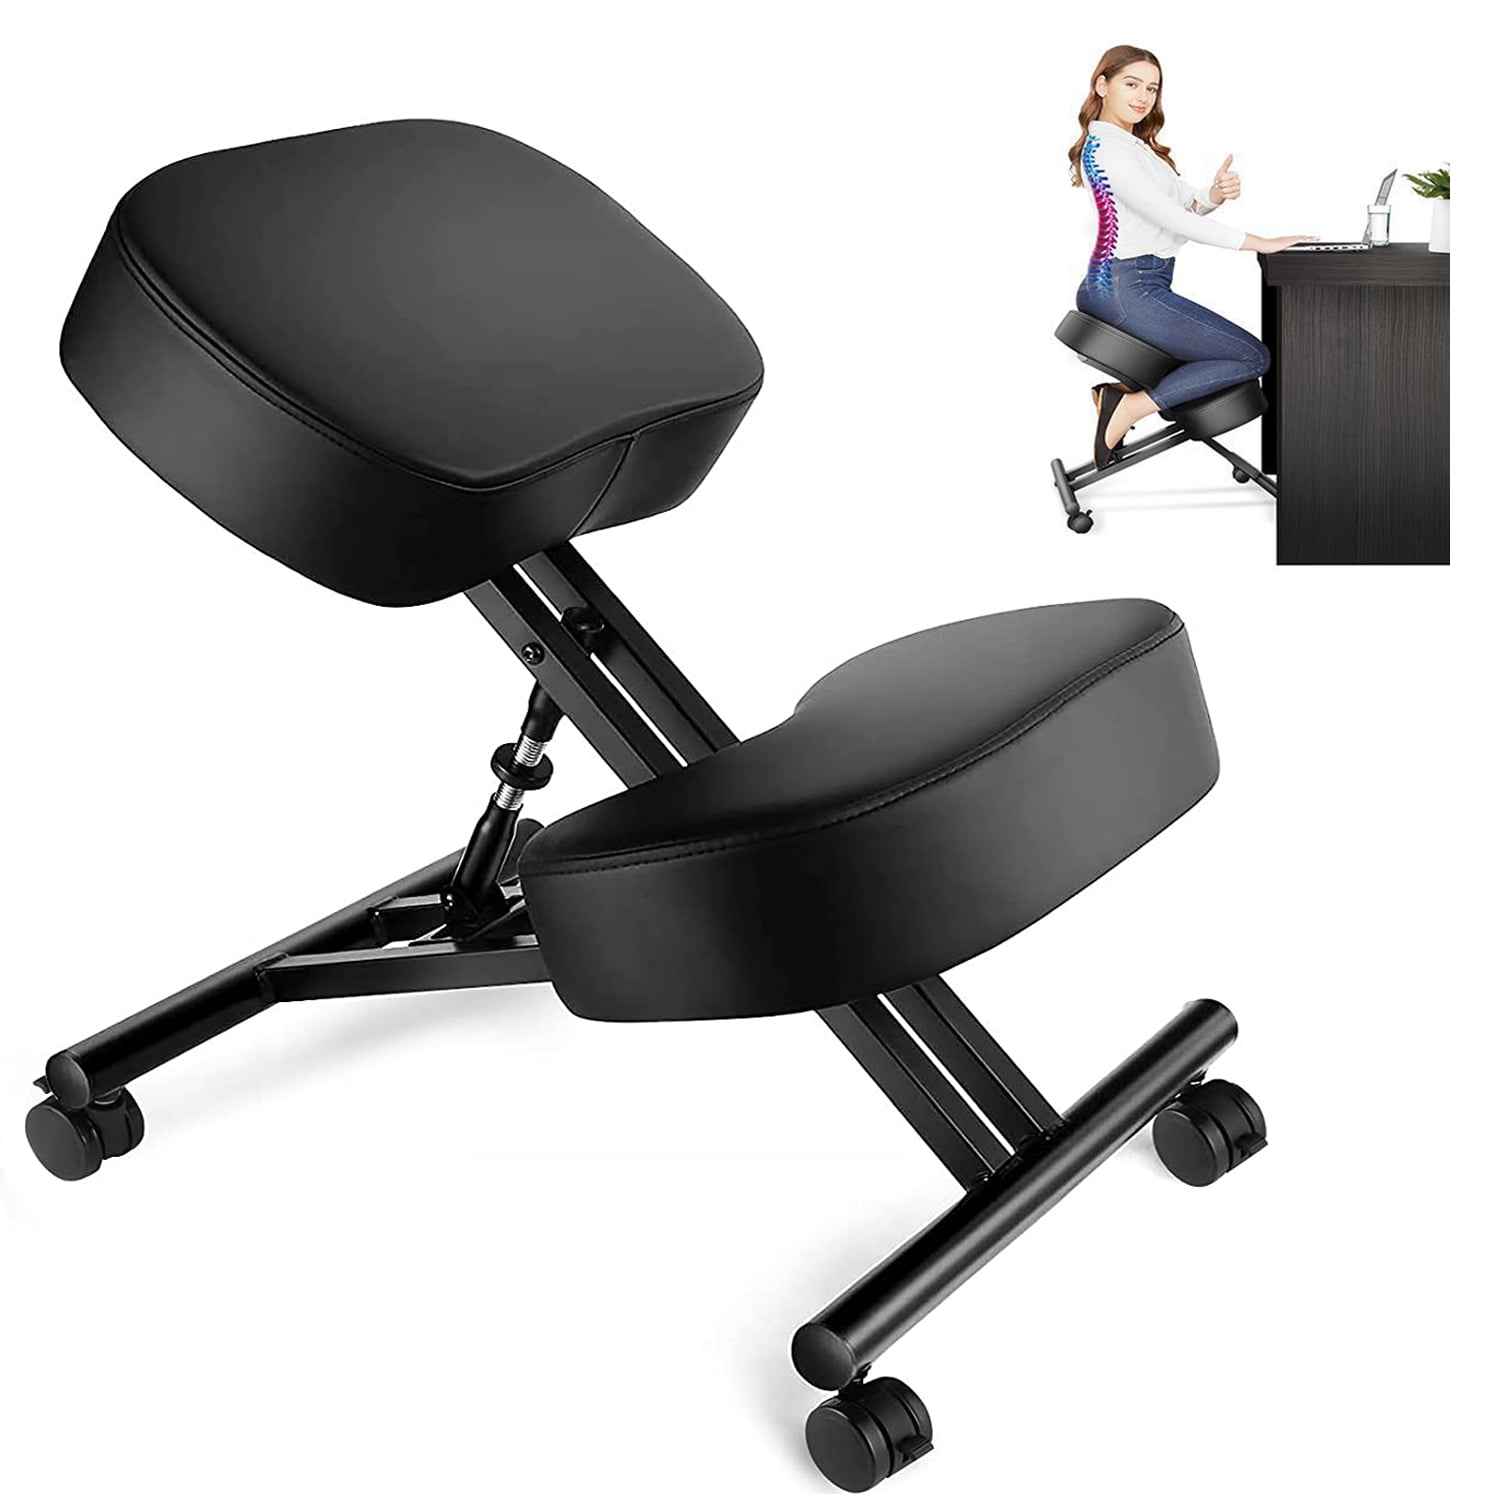 Ergonomic Office Chair Kneeling Chair Adjustable Knee Stool for Healthy Back & Upright Posture - Great with Thick Comfortable Cushions